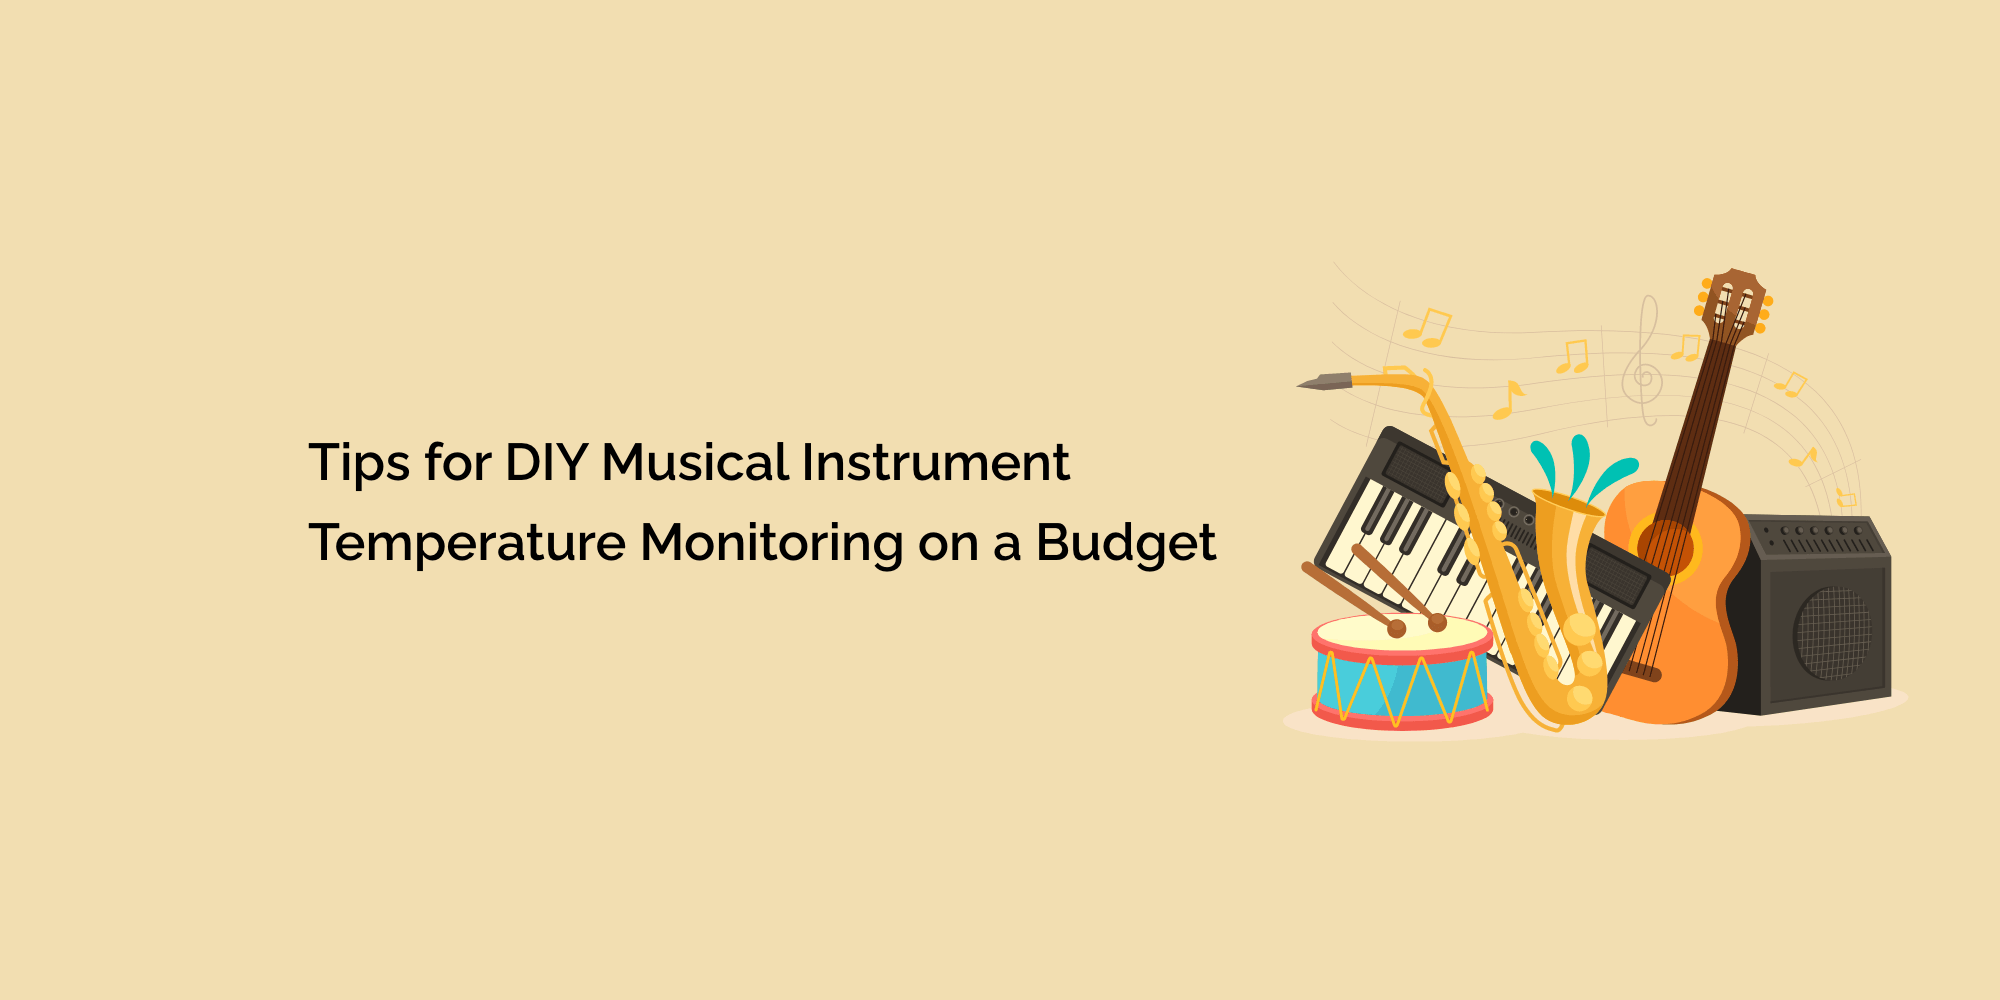 Tips for DIY Musical Instrument Temperature Monitoring on a Budget